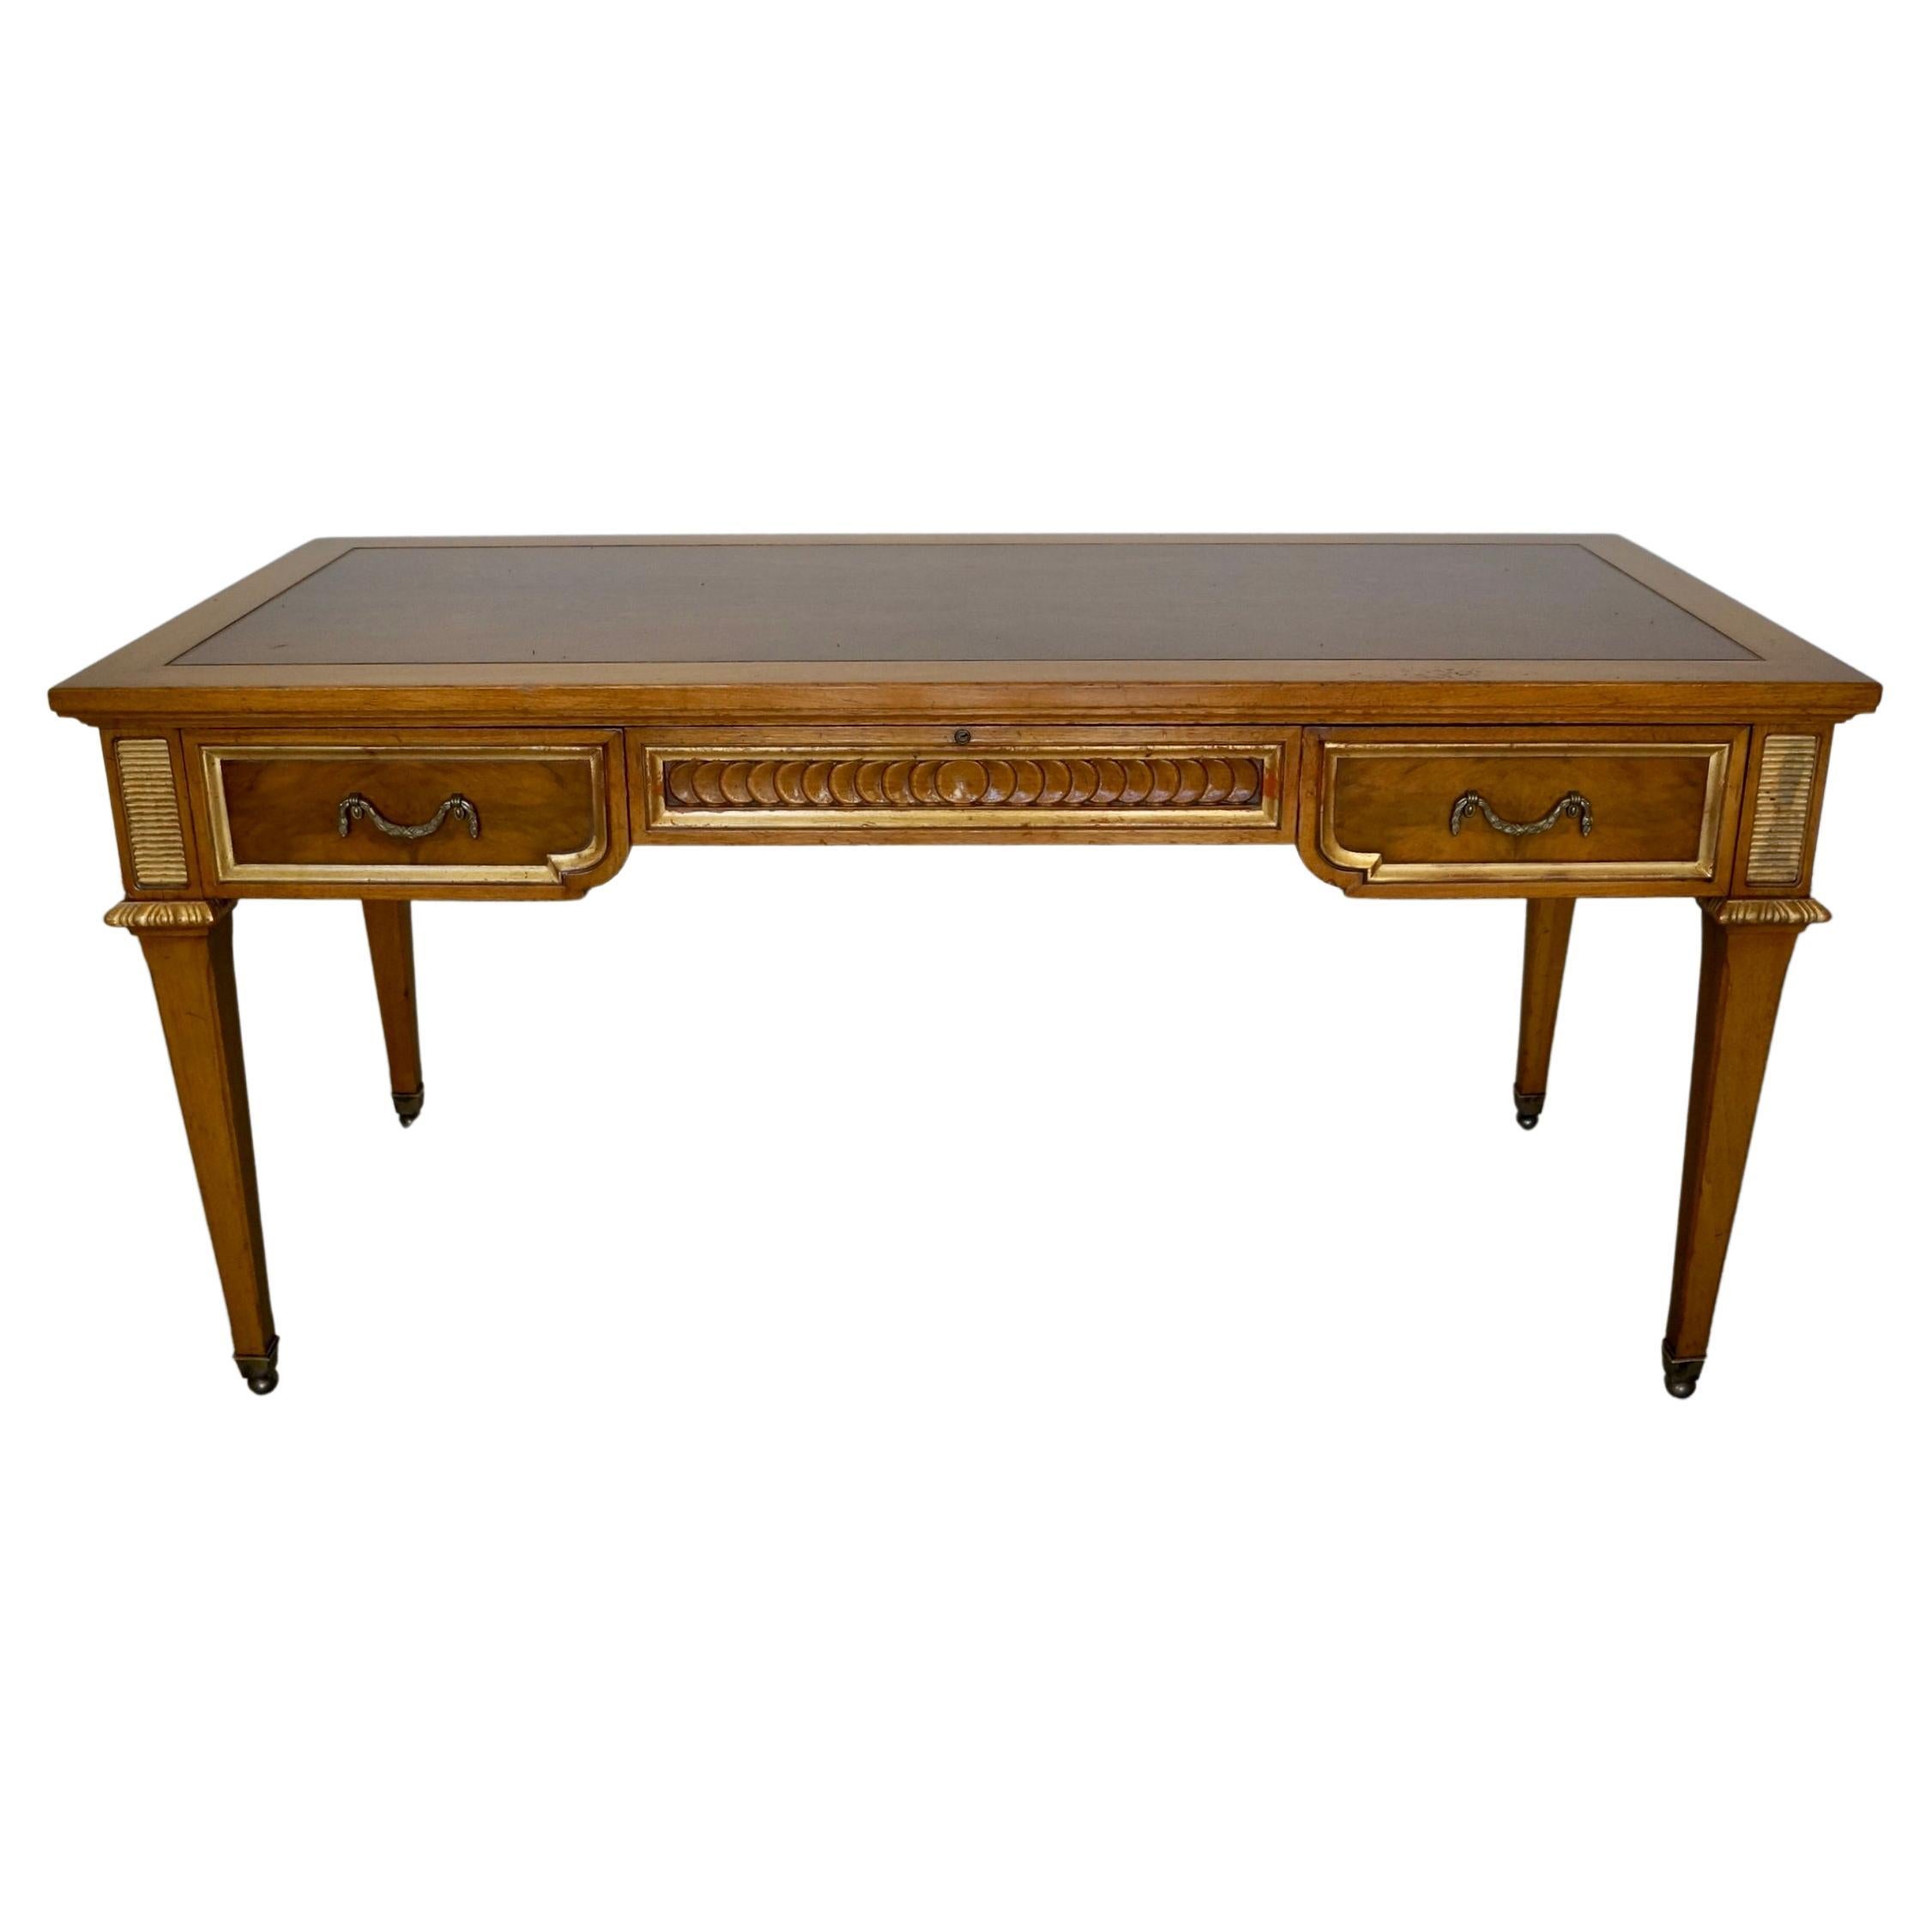 1960s Hollywood Regency Neoclassical Revival Karges Writing Desk For Sale